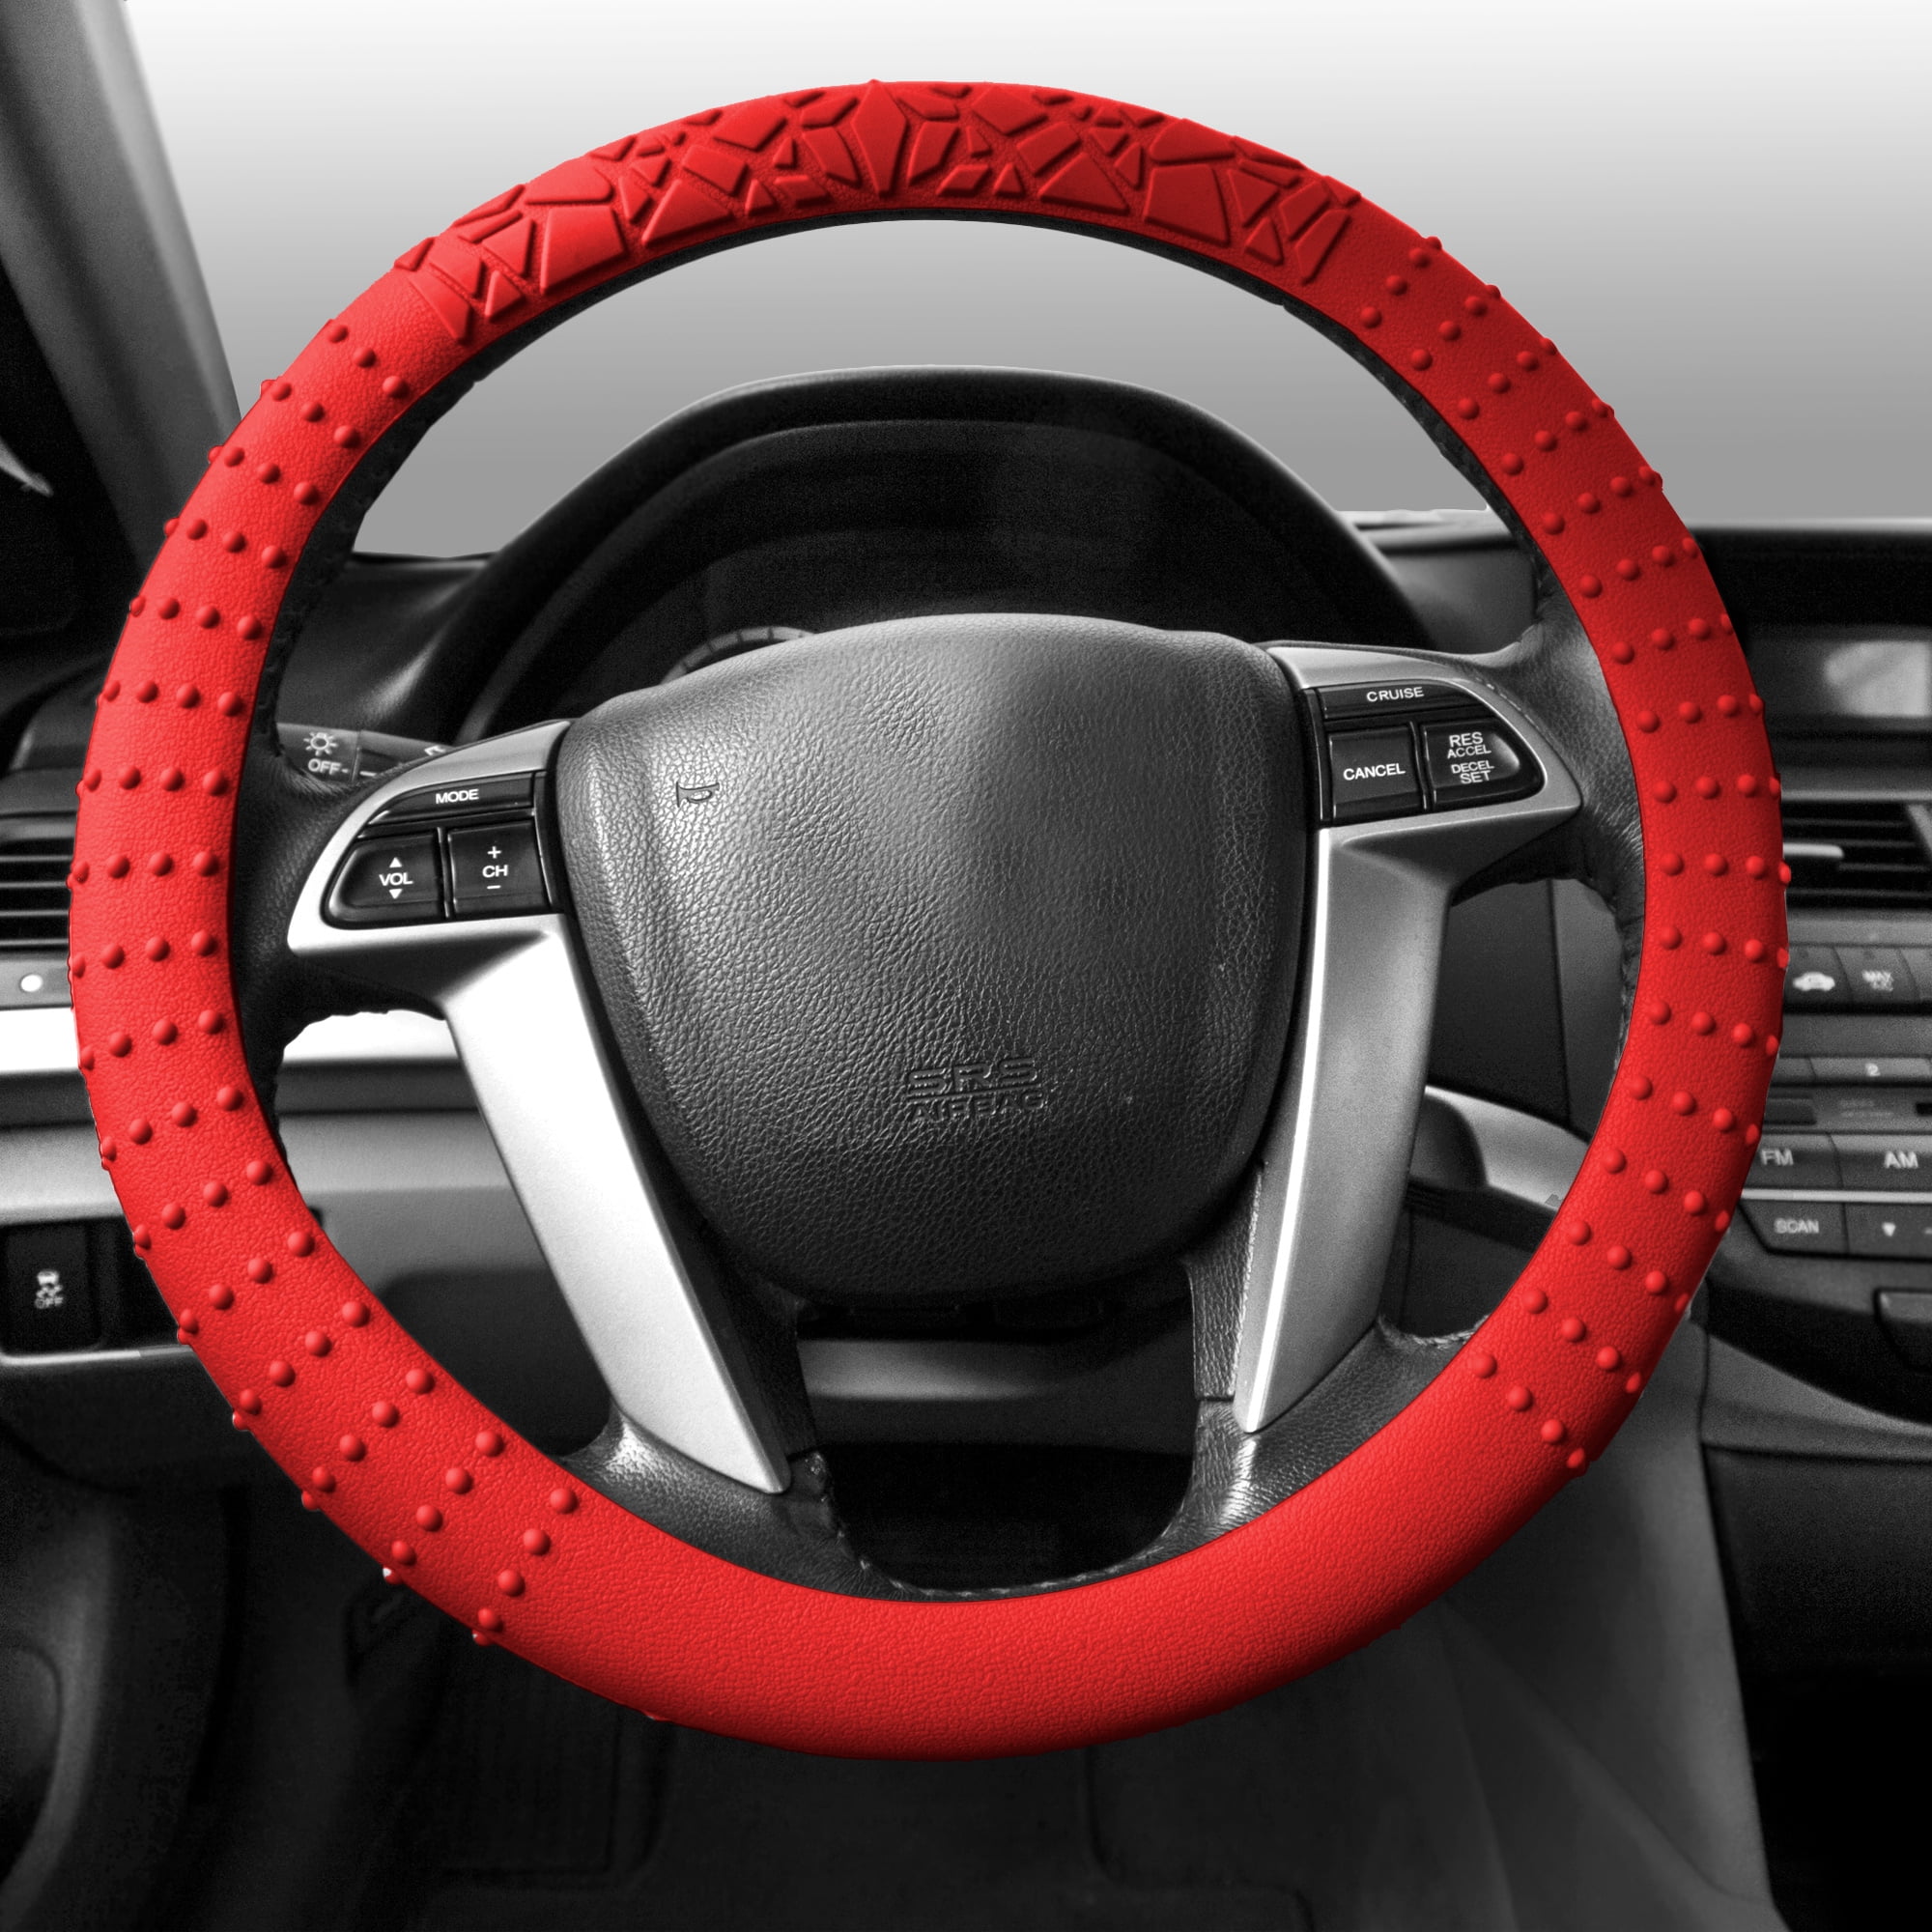 FH Group, Silicone Steering wheel cover 14 Colors Nibs Sturdy Massage Ask Me Who I Tied To The Steering Wheel